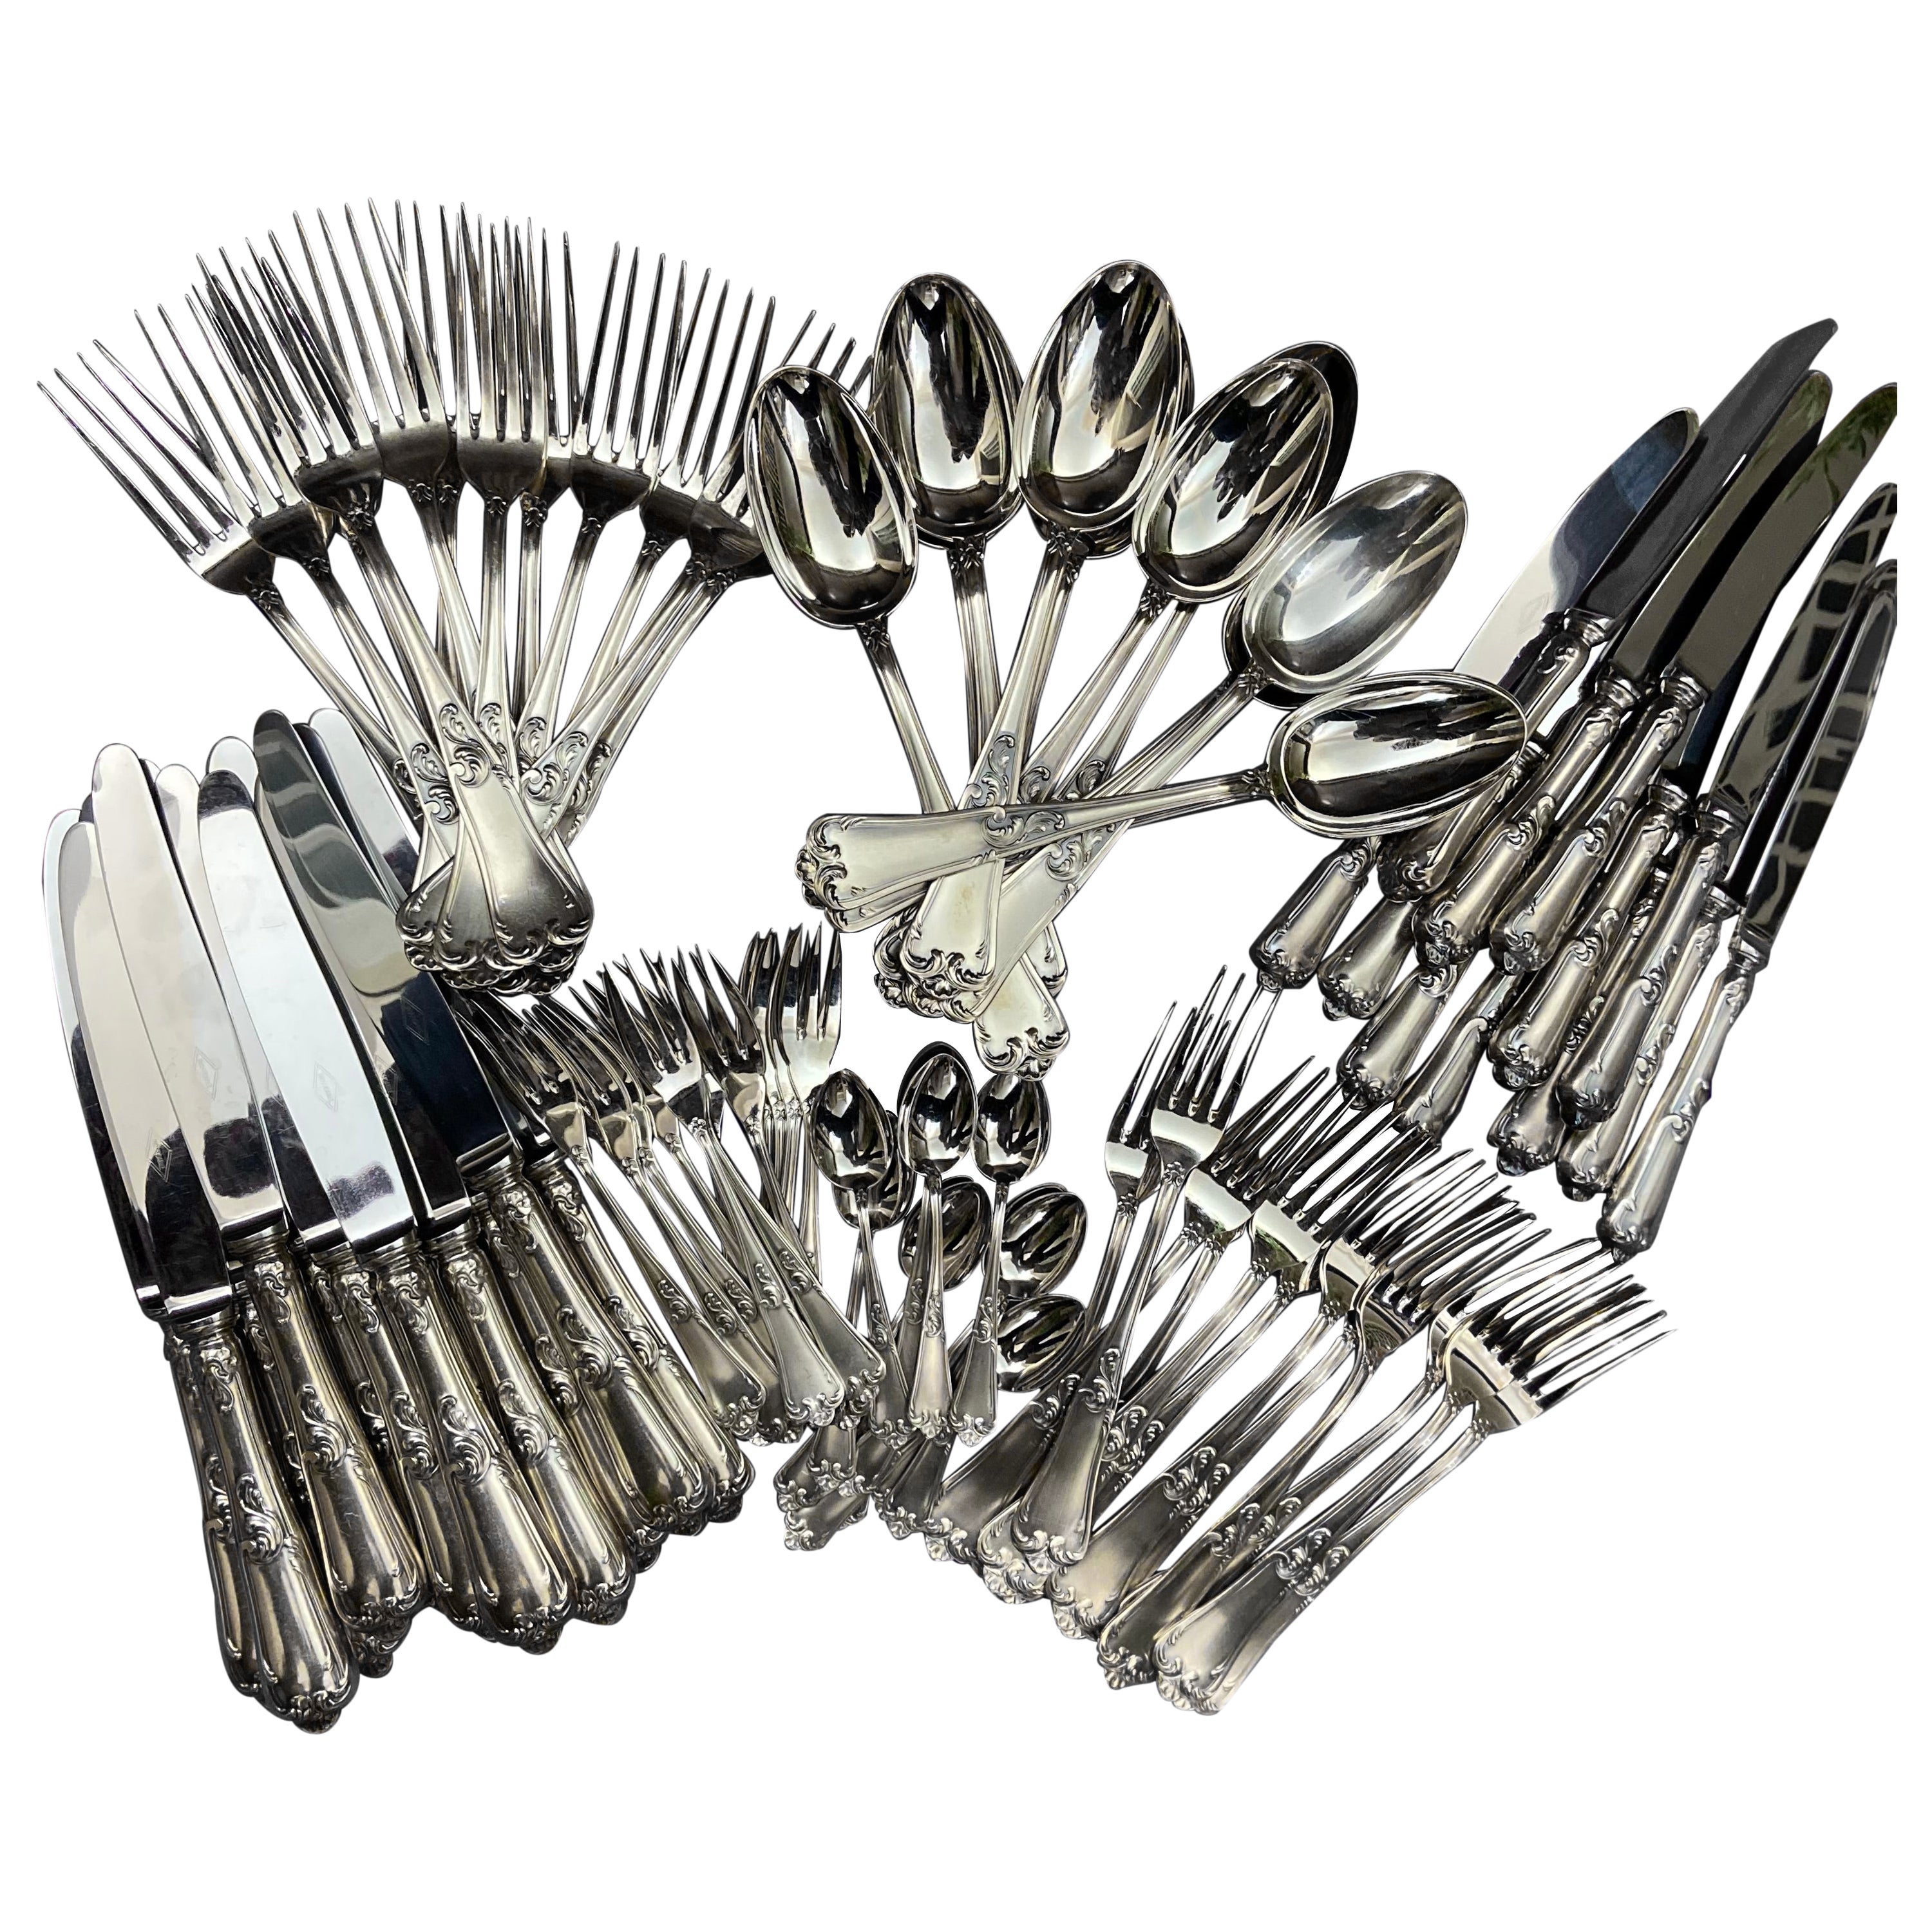 800 silver cutlery set, 84 pieces, complete with storage cloths.
It dates back to the 1980s, is in excellent condition and is composed as follows:
12 table spoons (each measuring 21 cm and weighing 86 grams); 12 table forks (each measuring 21 cm and